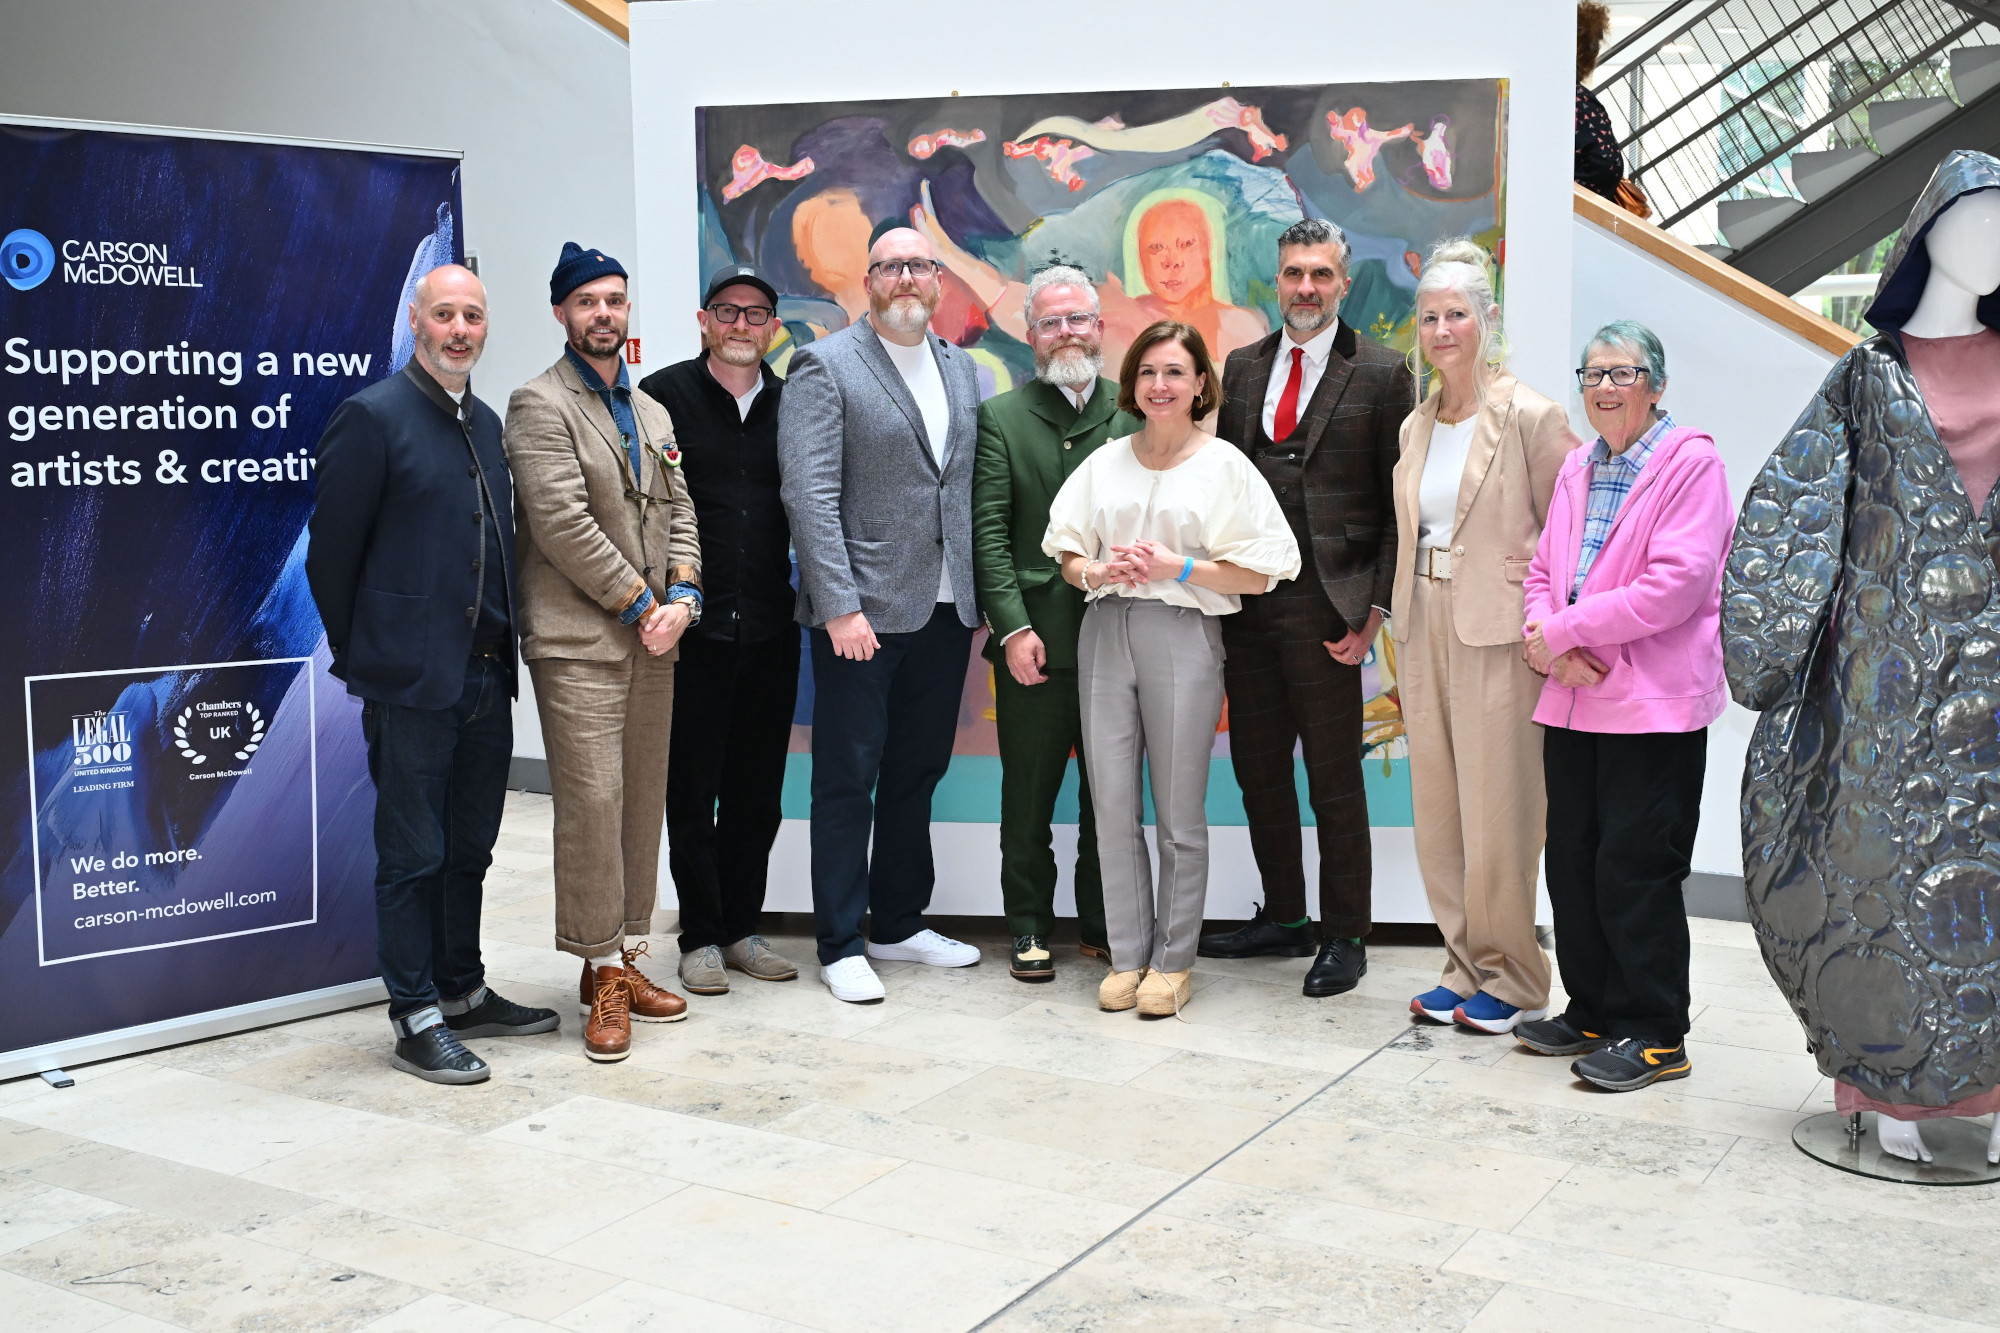 Carson McDowell continues support of Belfast School of Art in 175th anniversary year